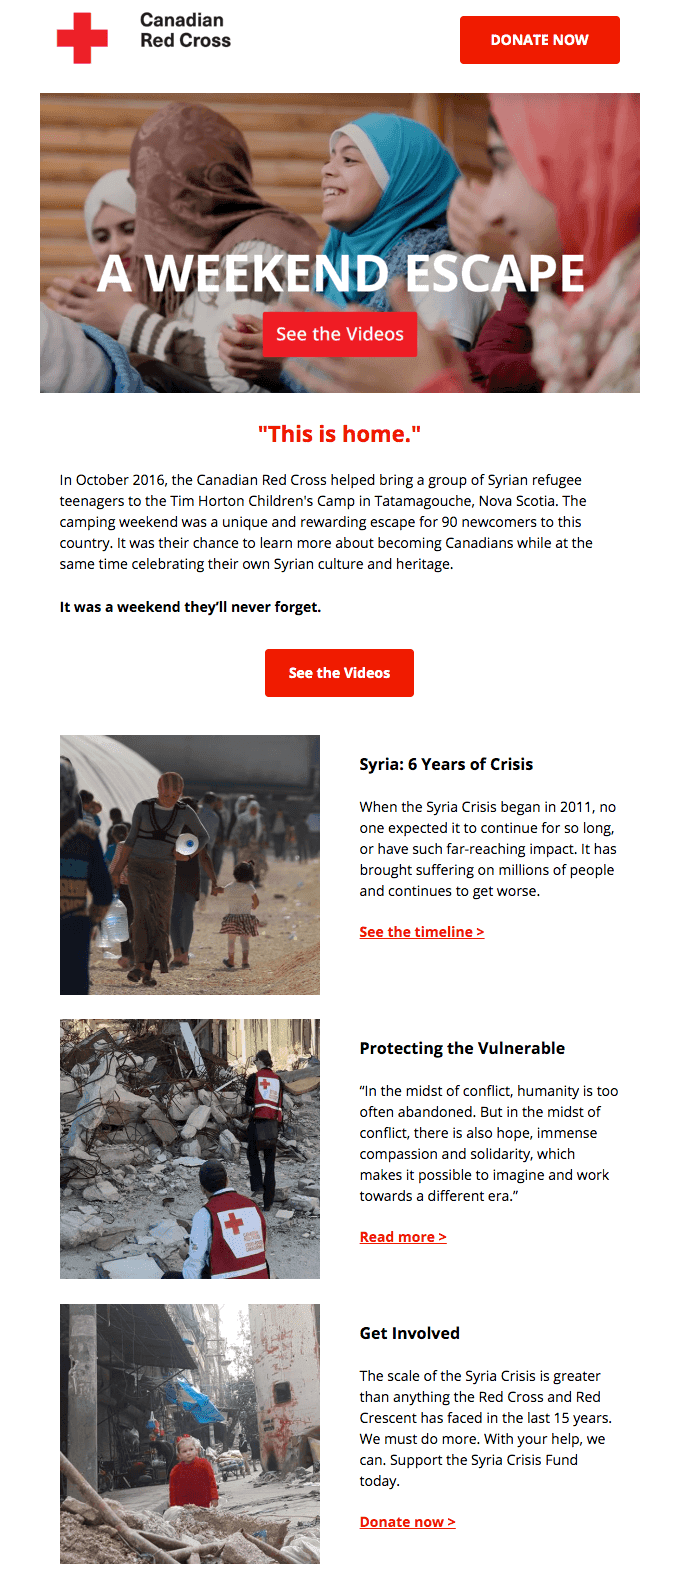 Canadian-Red-Cross-Email-Charity (1) (1)